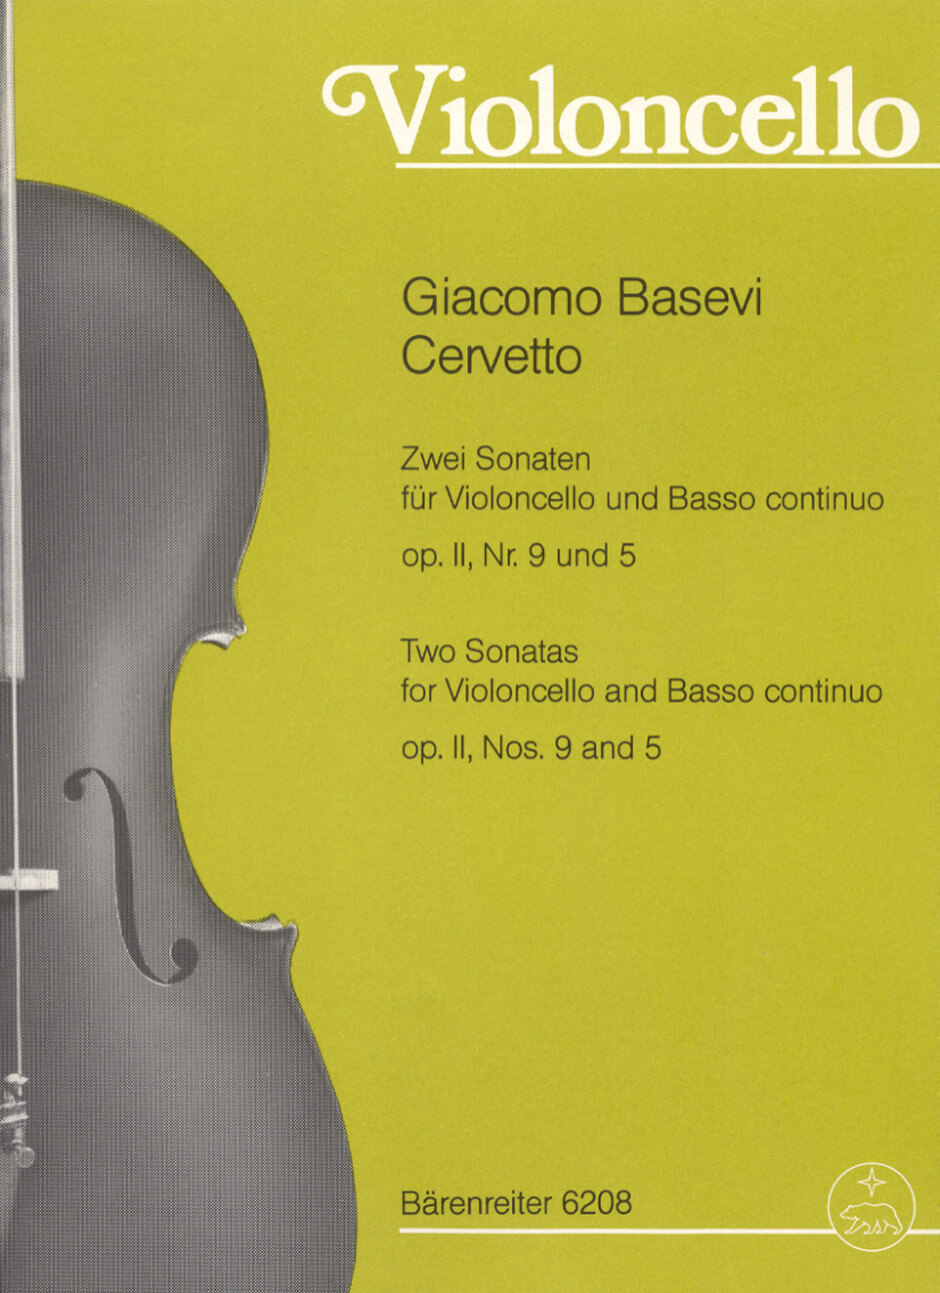 Zwei Sonaten aus op.2 for Violoncello and Basso continuo or 